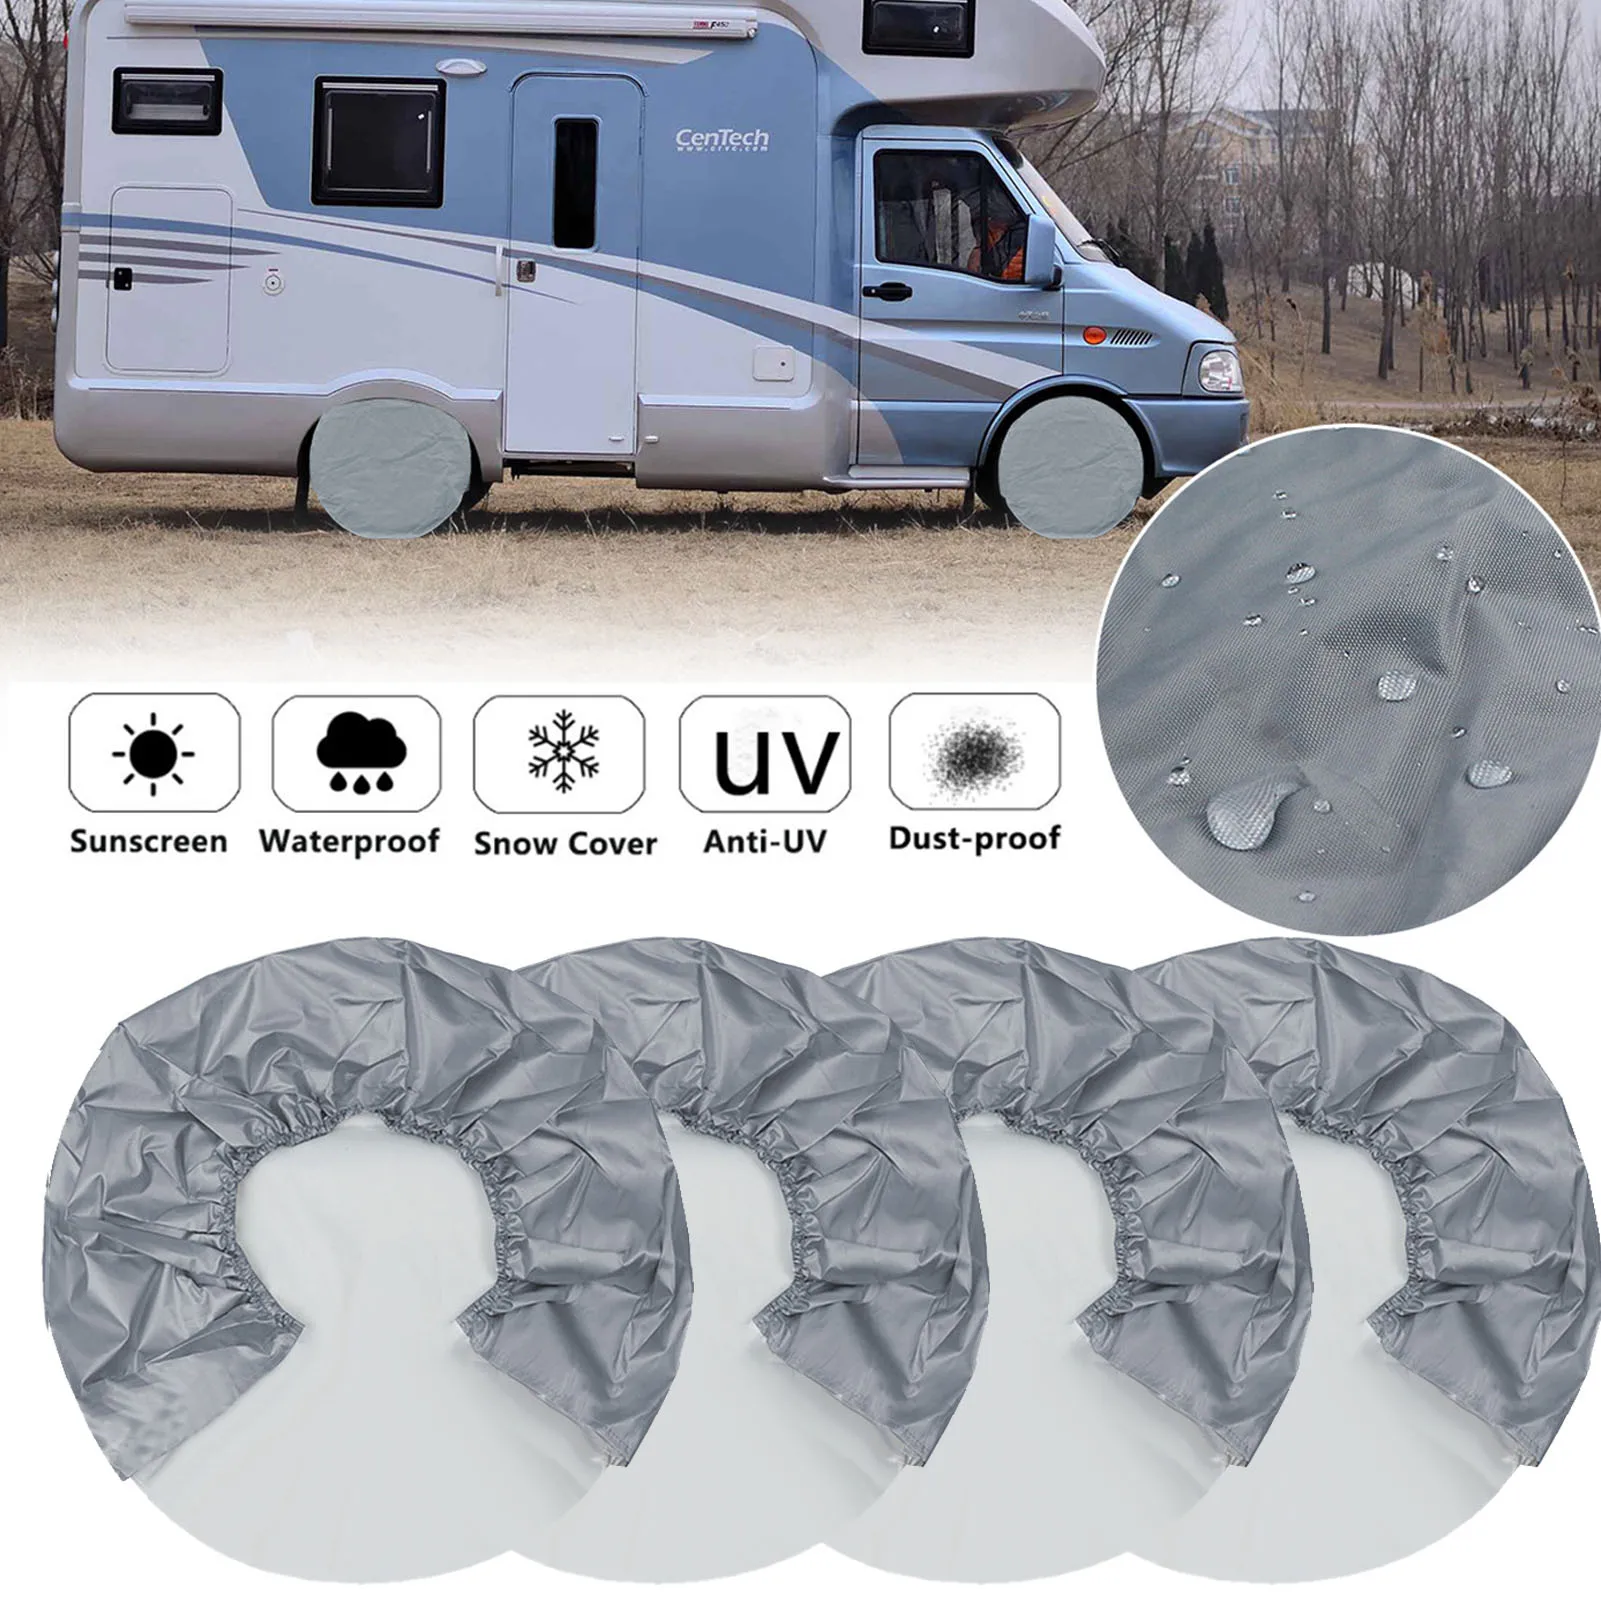 

4Pcs 210T Heavy Duty RV Tire Cover Car Wheel Tire Covers Wheel Waterproof Protective Cover For Truck RV Trailer Camper Motorhome